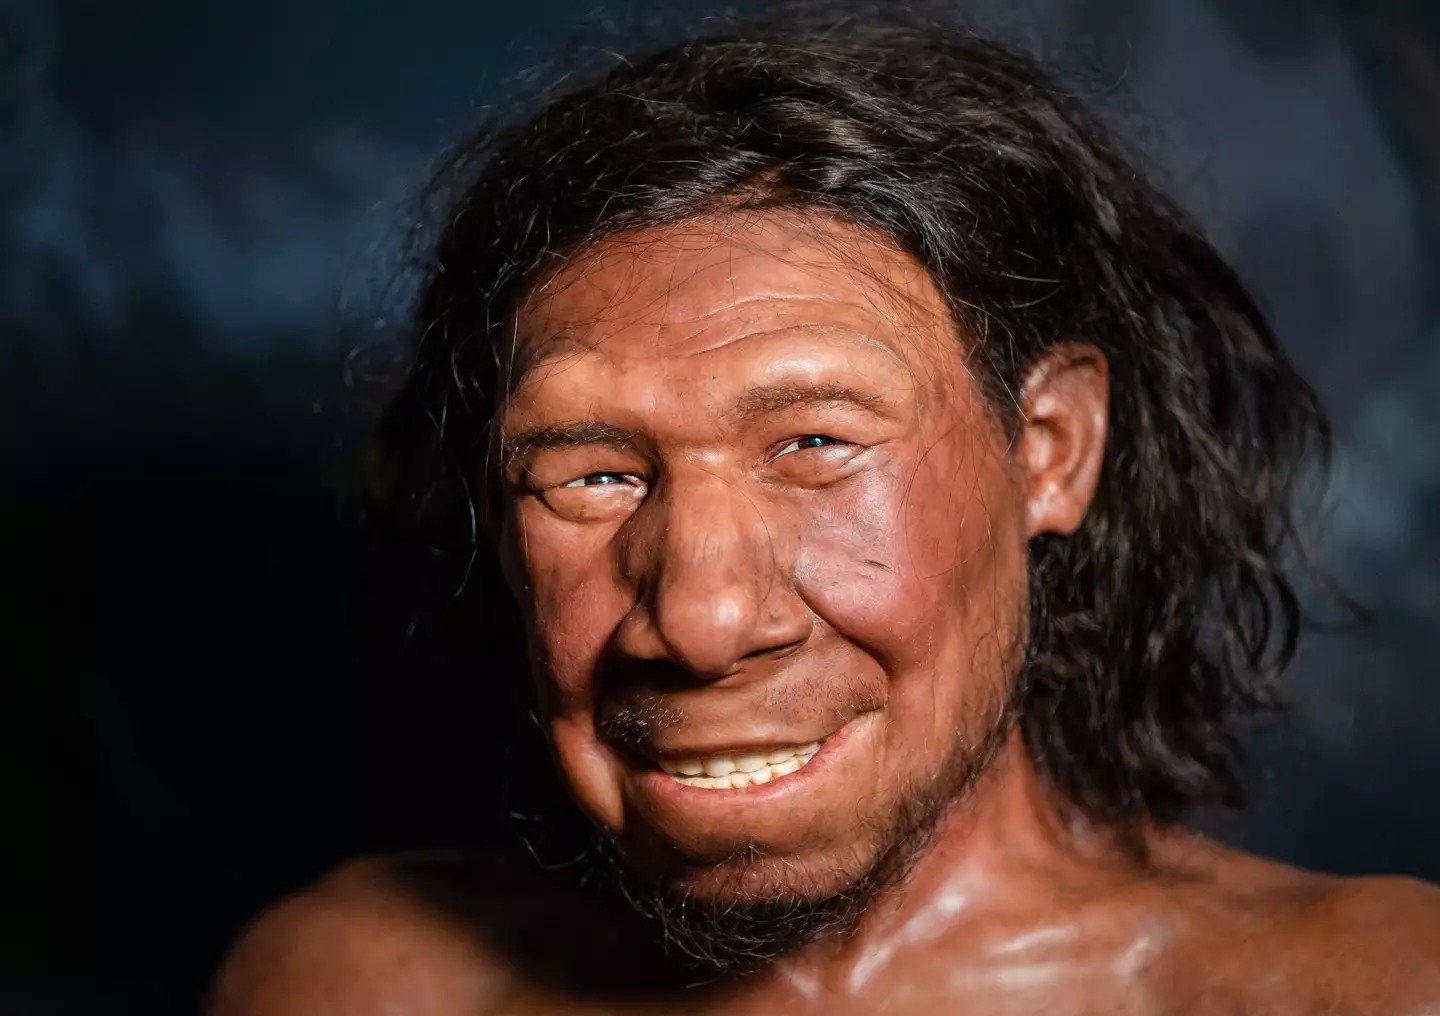 Neanderthal DNA still exists today.